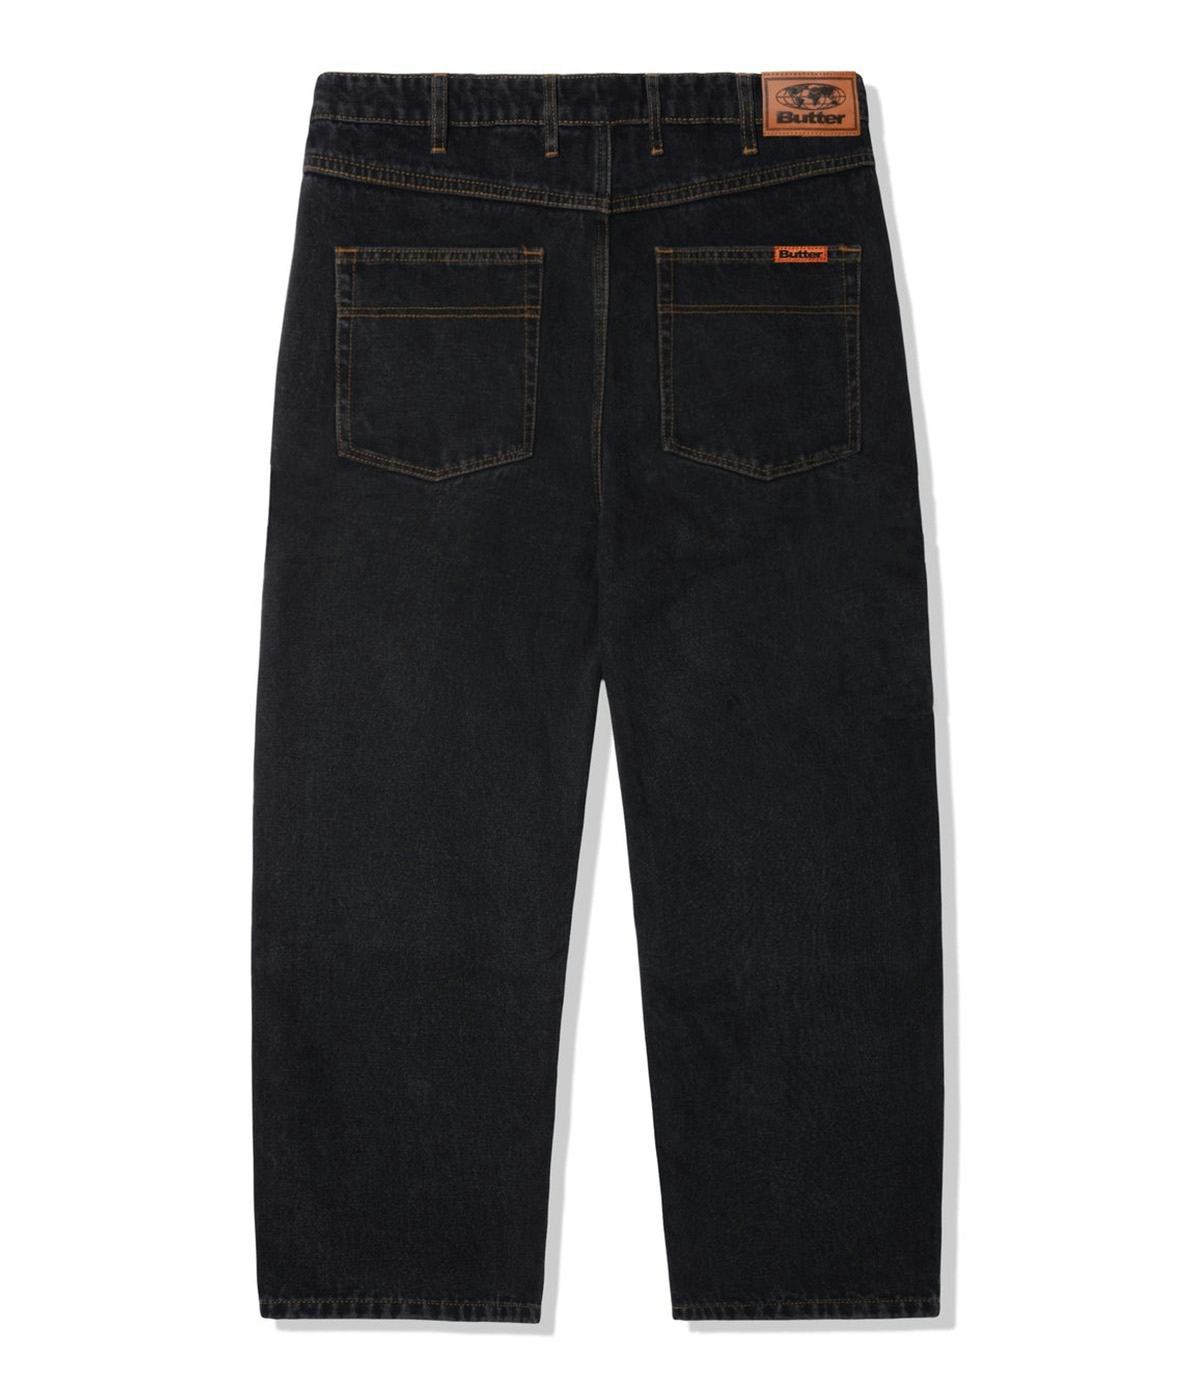 Butter Goods Relaxed Denim Jeans Washed Black 2